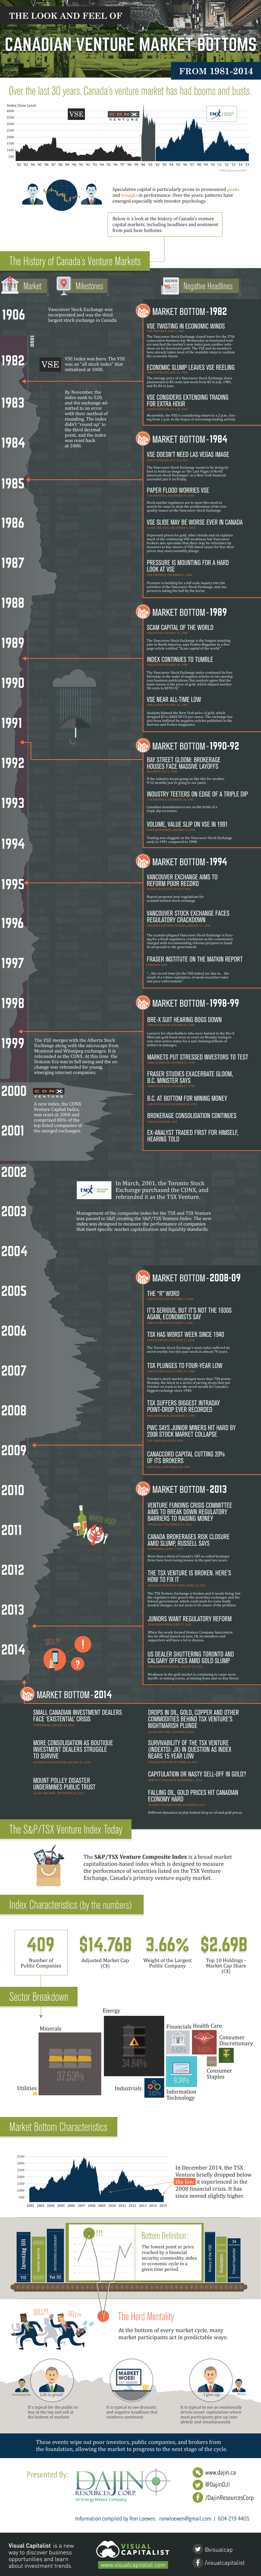 The Look and Feel of Canadian Venture Market Bottoms From 1981 to 2014